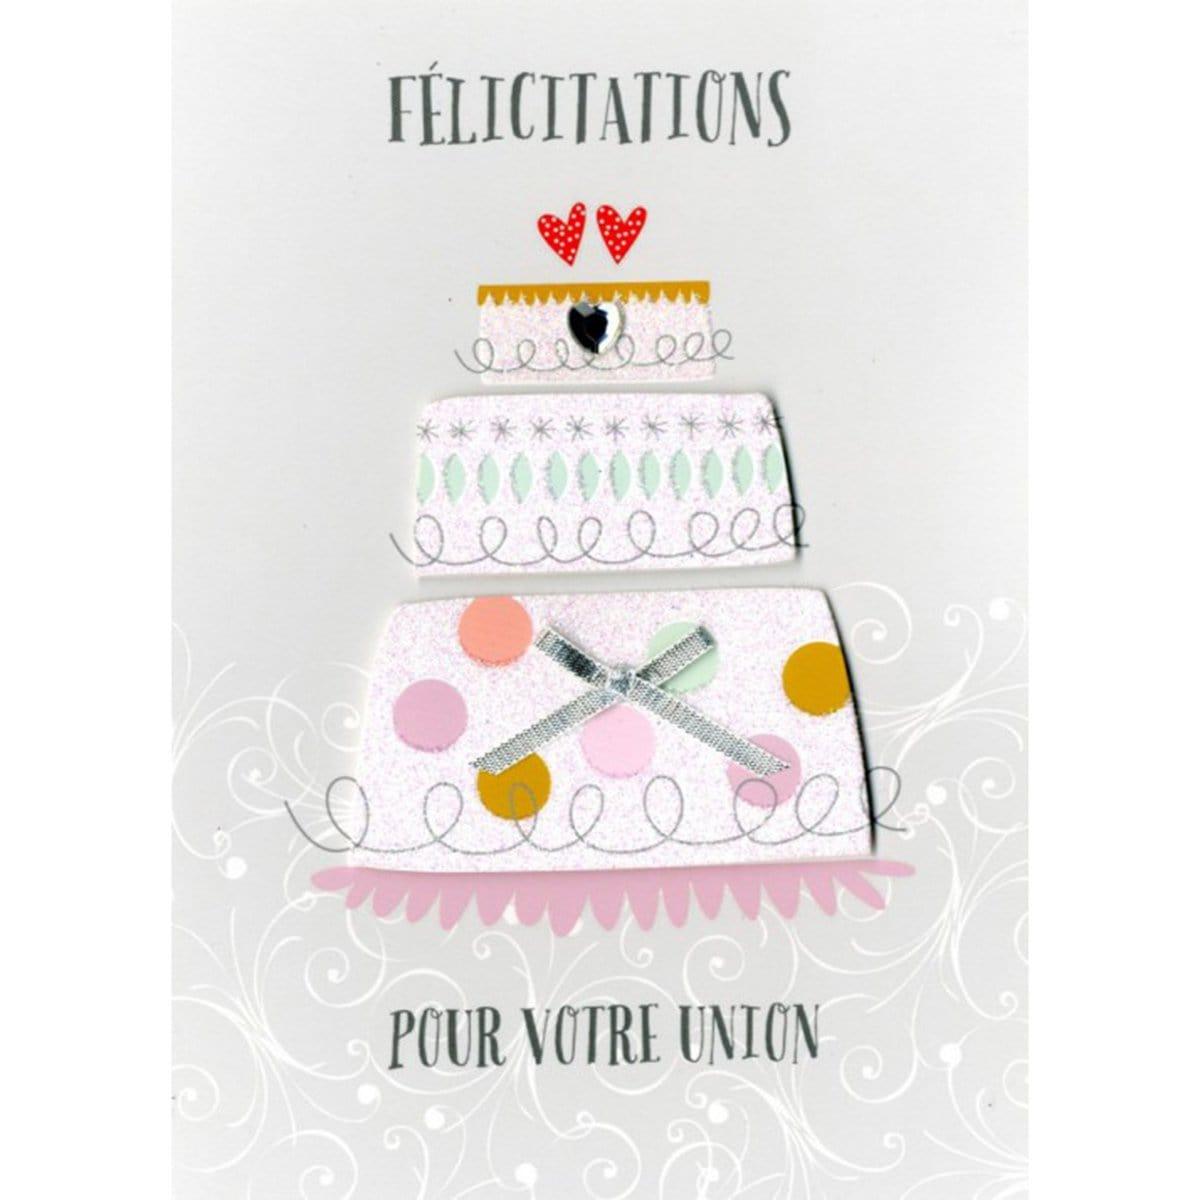 Buy Greeting Cards Yours Truly - FÃ©licitations Pour Votre Union sold at Party Expert